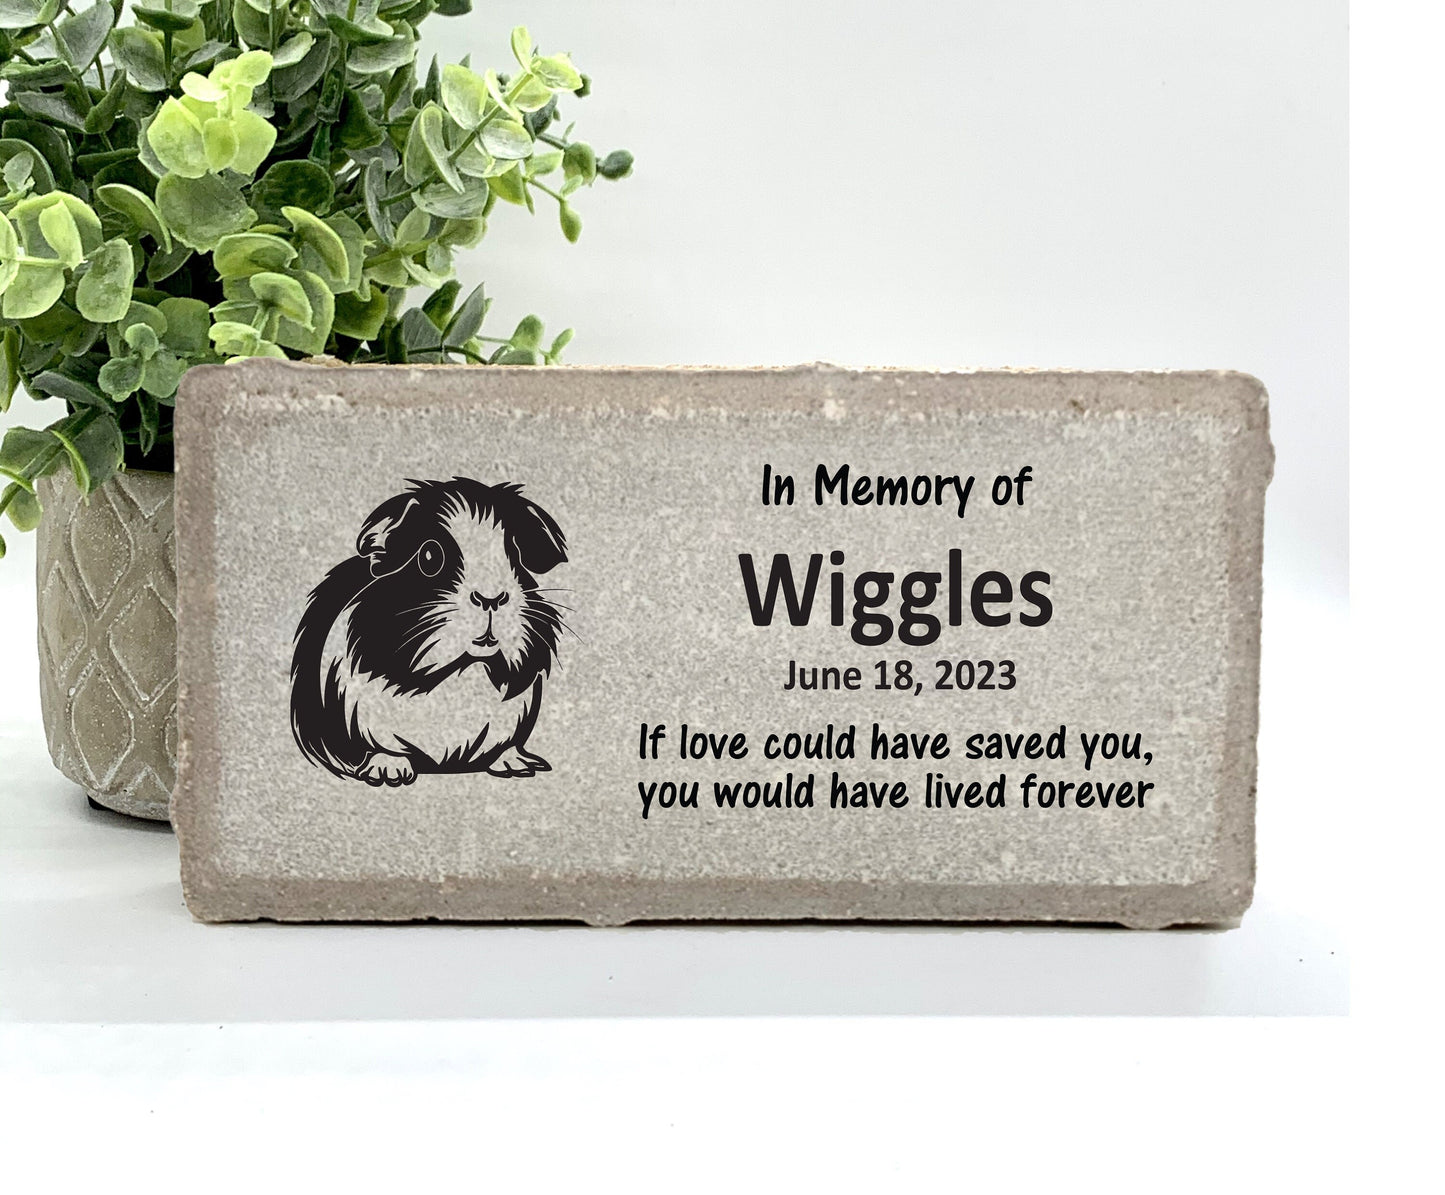 Personalized Guinea Pig Memorial Gifts with a variety of indoor and outdoor stone choices at www.florida-funshine.com. Our Custom Pet Memorial Stones serve as heartfelt sympathy gifts for those grieving a pet loss, ensuring a lasting tribute cherished for years. Enjoy free personalization, quick shipping in 1-2 business days, and quality crafted memorials made in the USA.